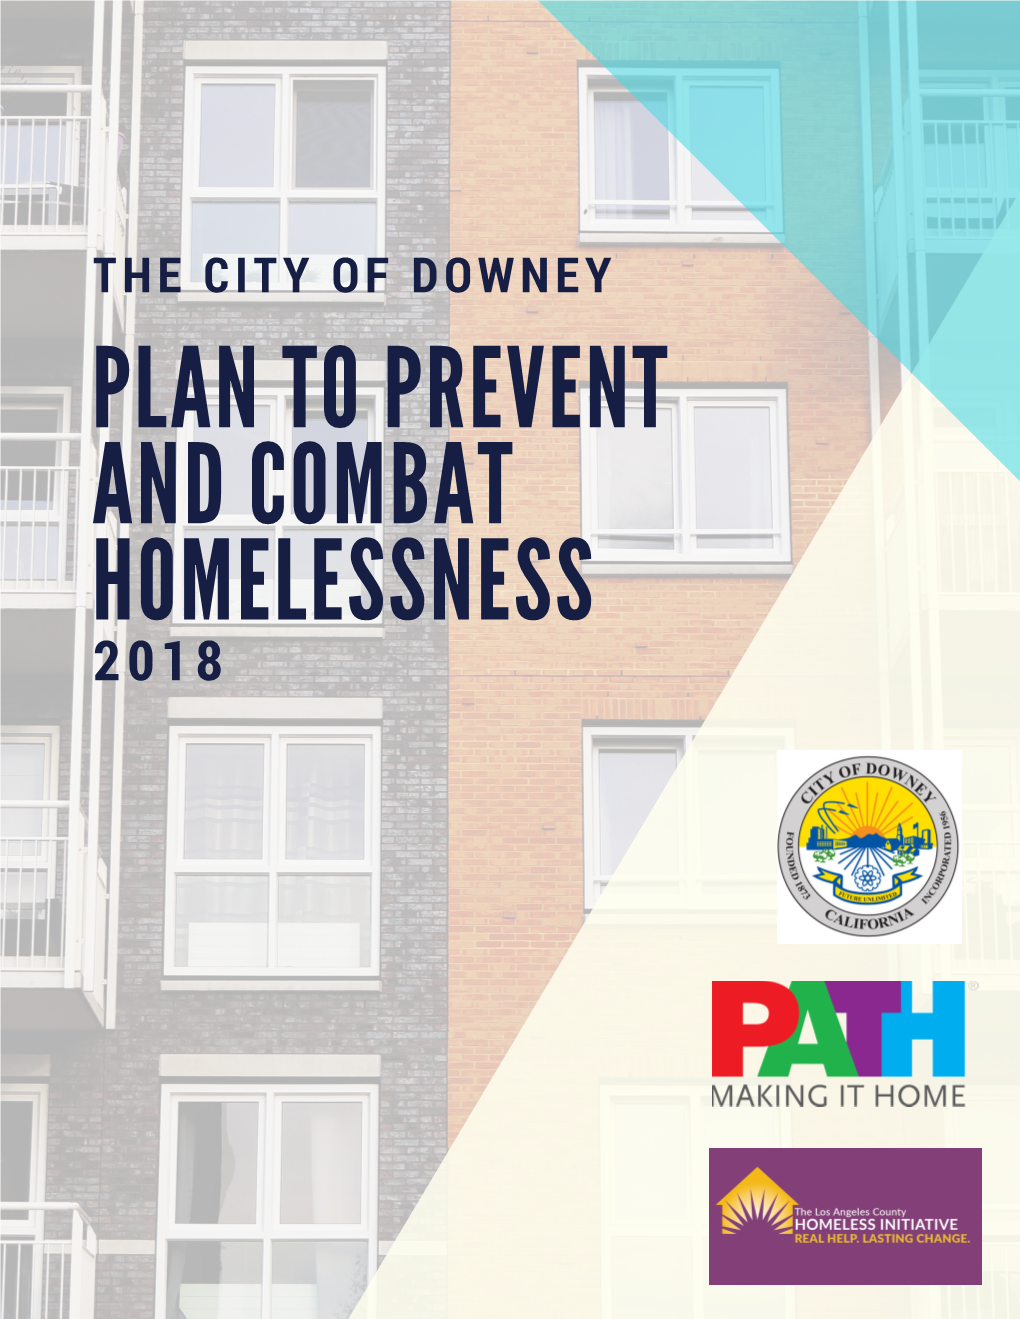 THE CITY of DOWNEY PLAN to PREVENT and COMBAT HOMELESSNESS 2018 Plan to Prevent and Combat Homelessness